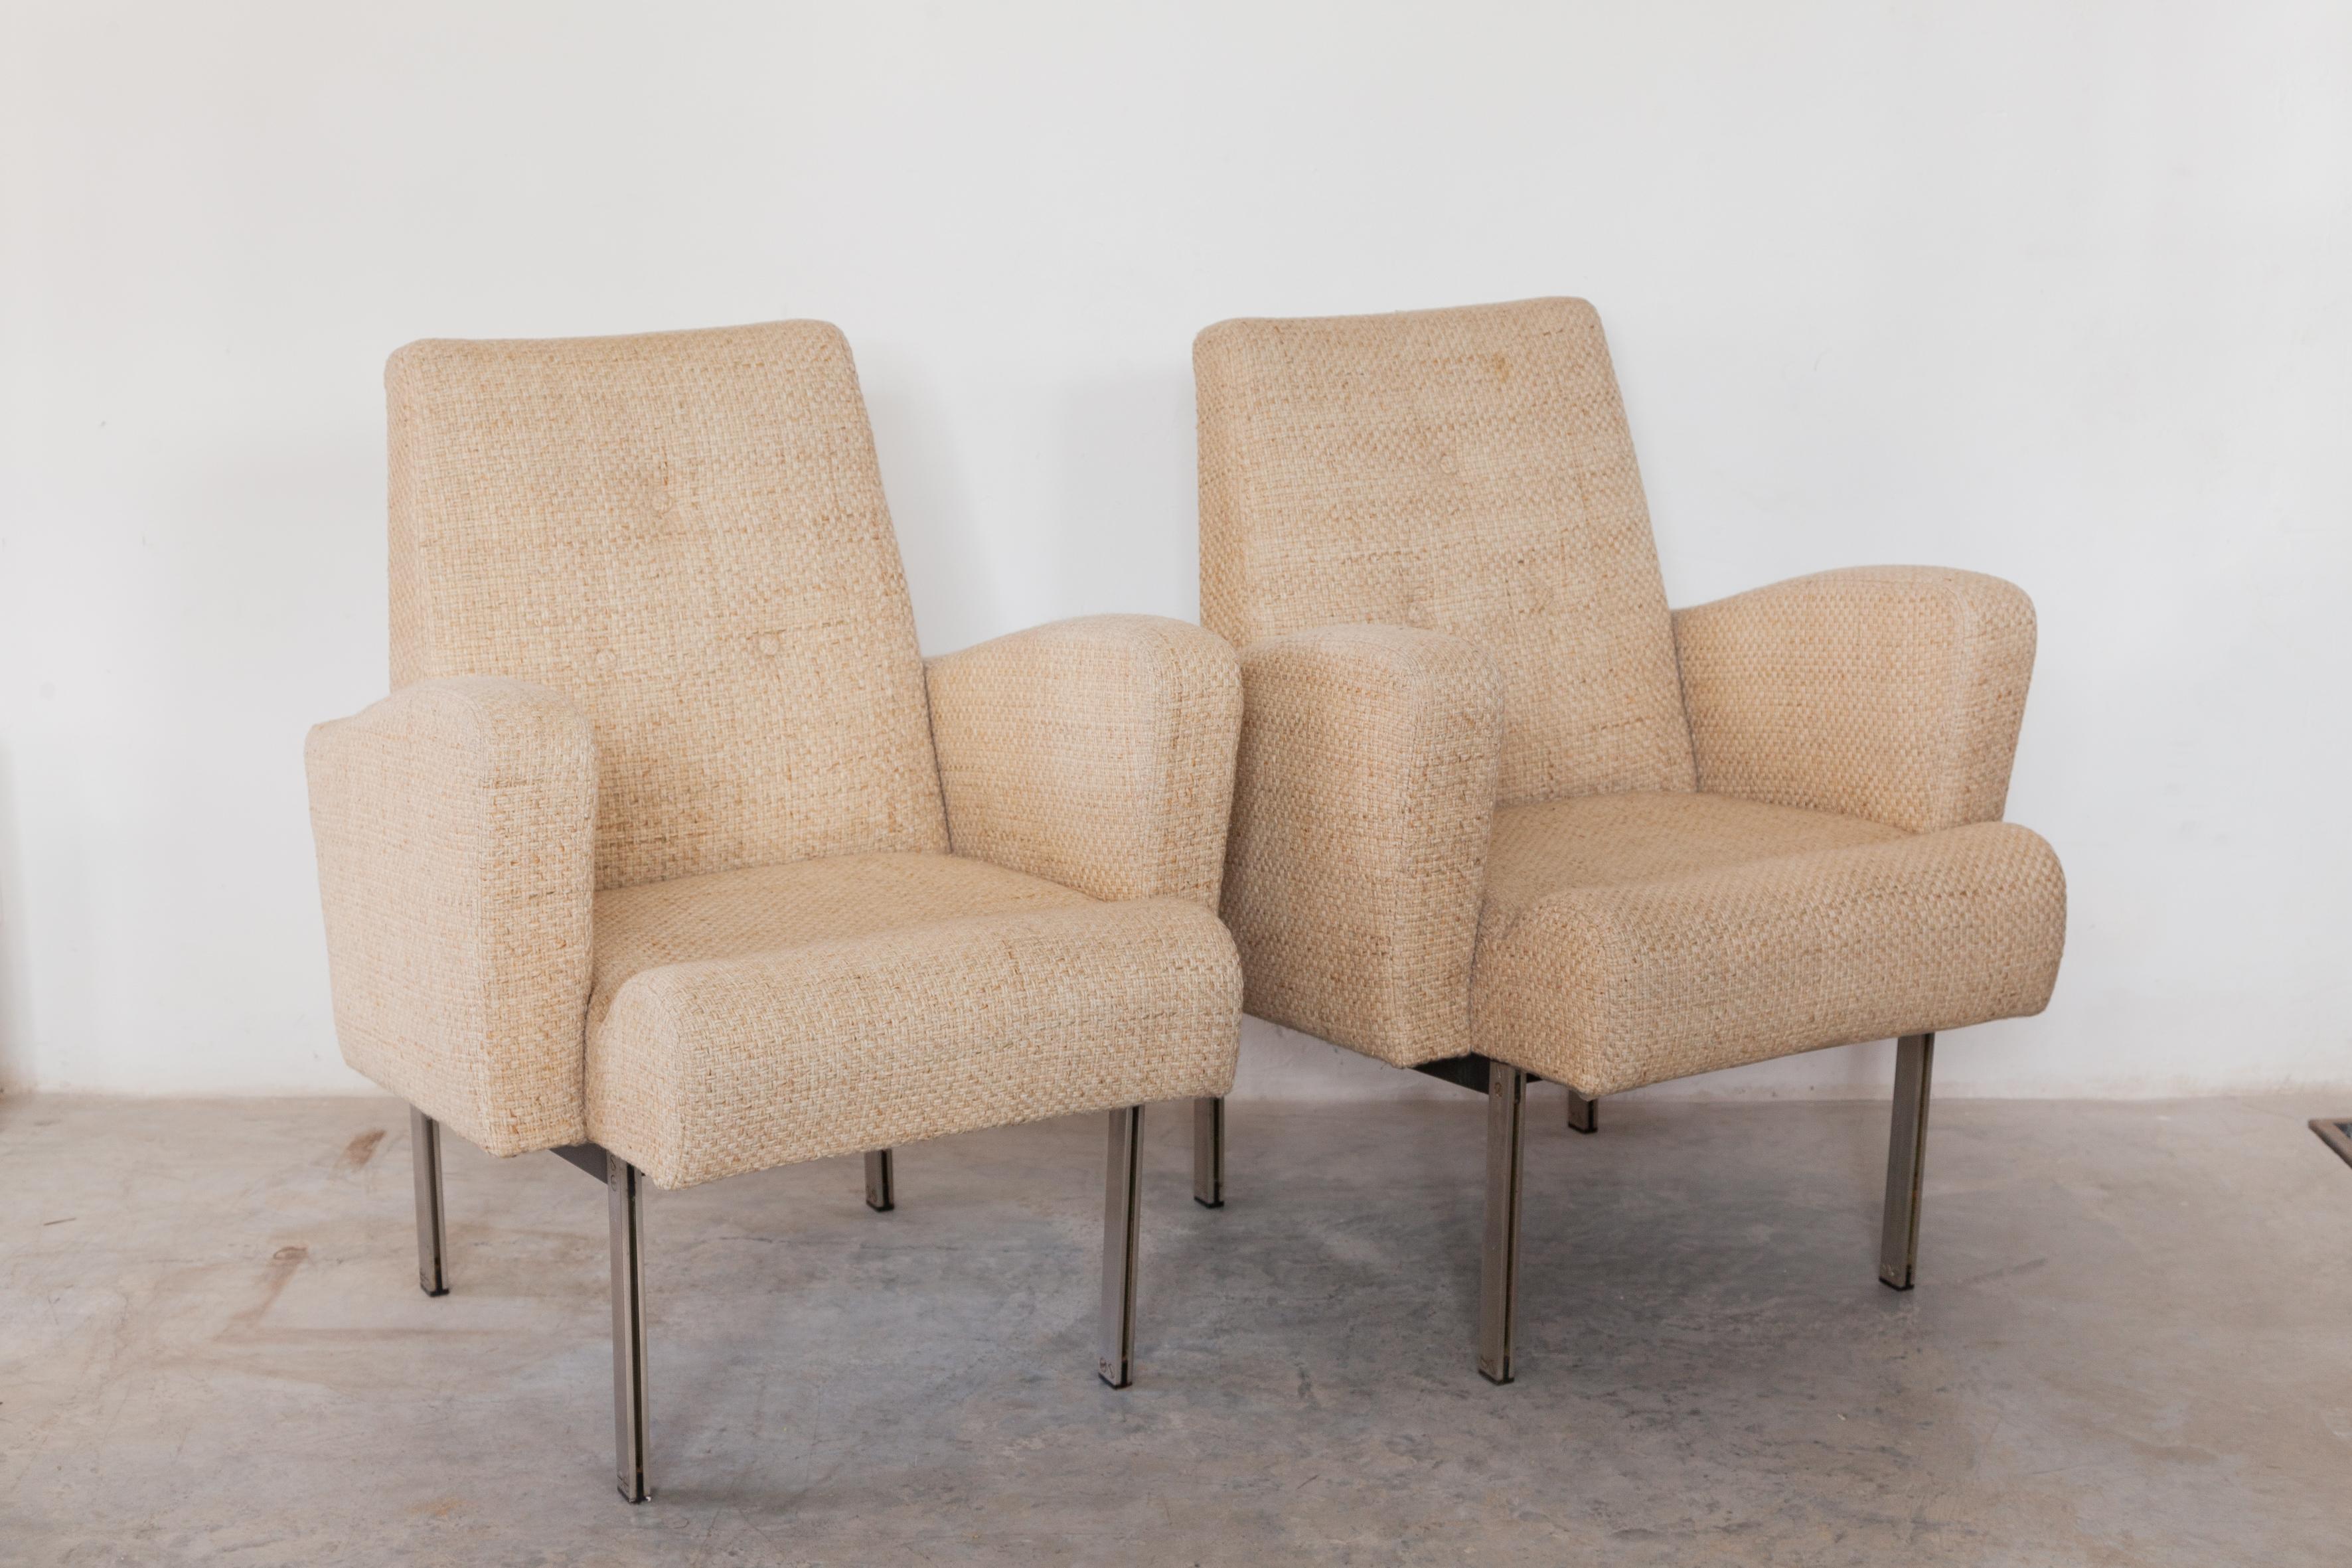 A beautiful set of vintage steel chromed of comfortable lounge chairs in style designed by Milo Baughman in 1960s. These classic and elegant chairs feature an architectural chrome frame with preformed foam equipped seating for your legs provides